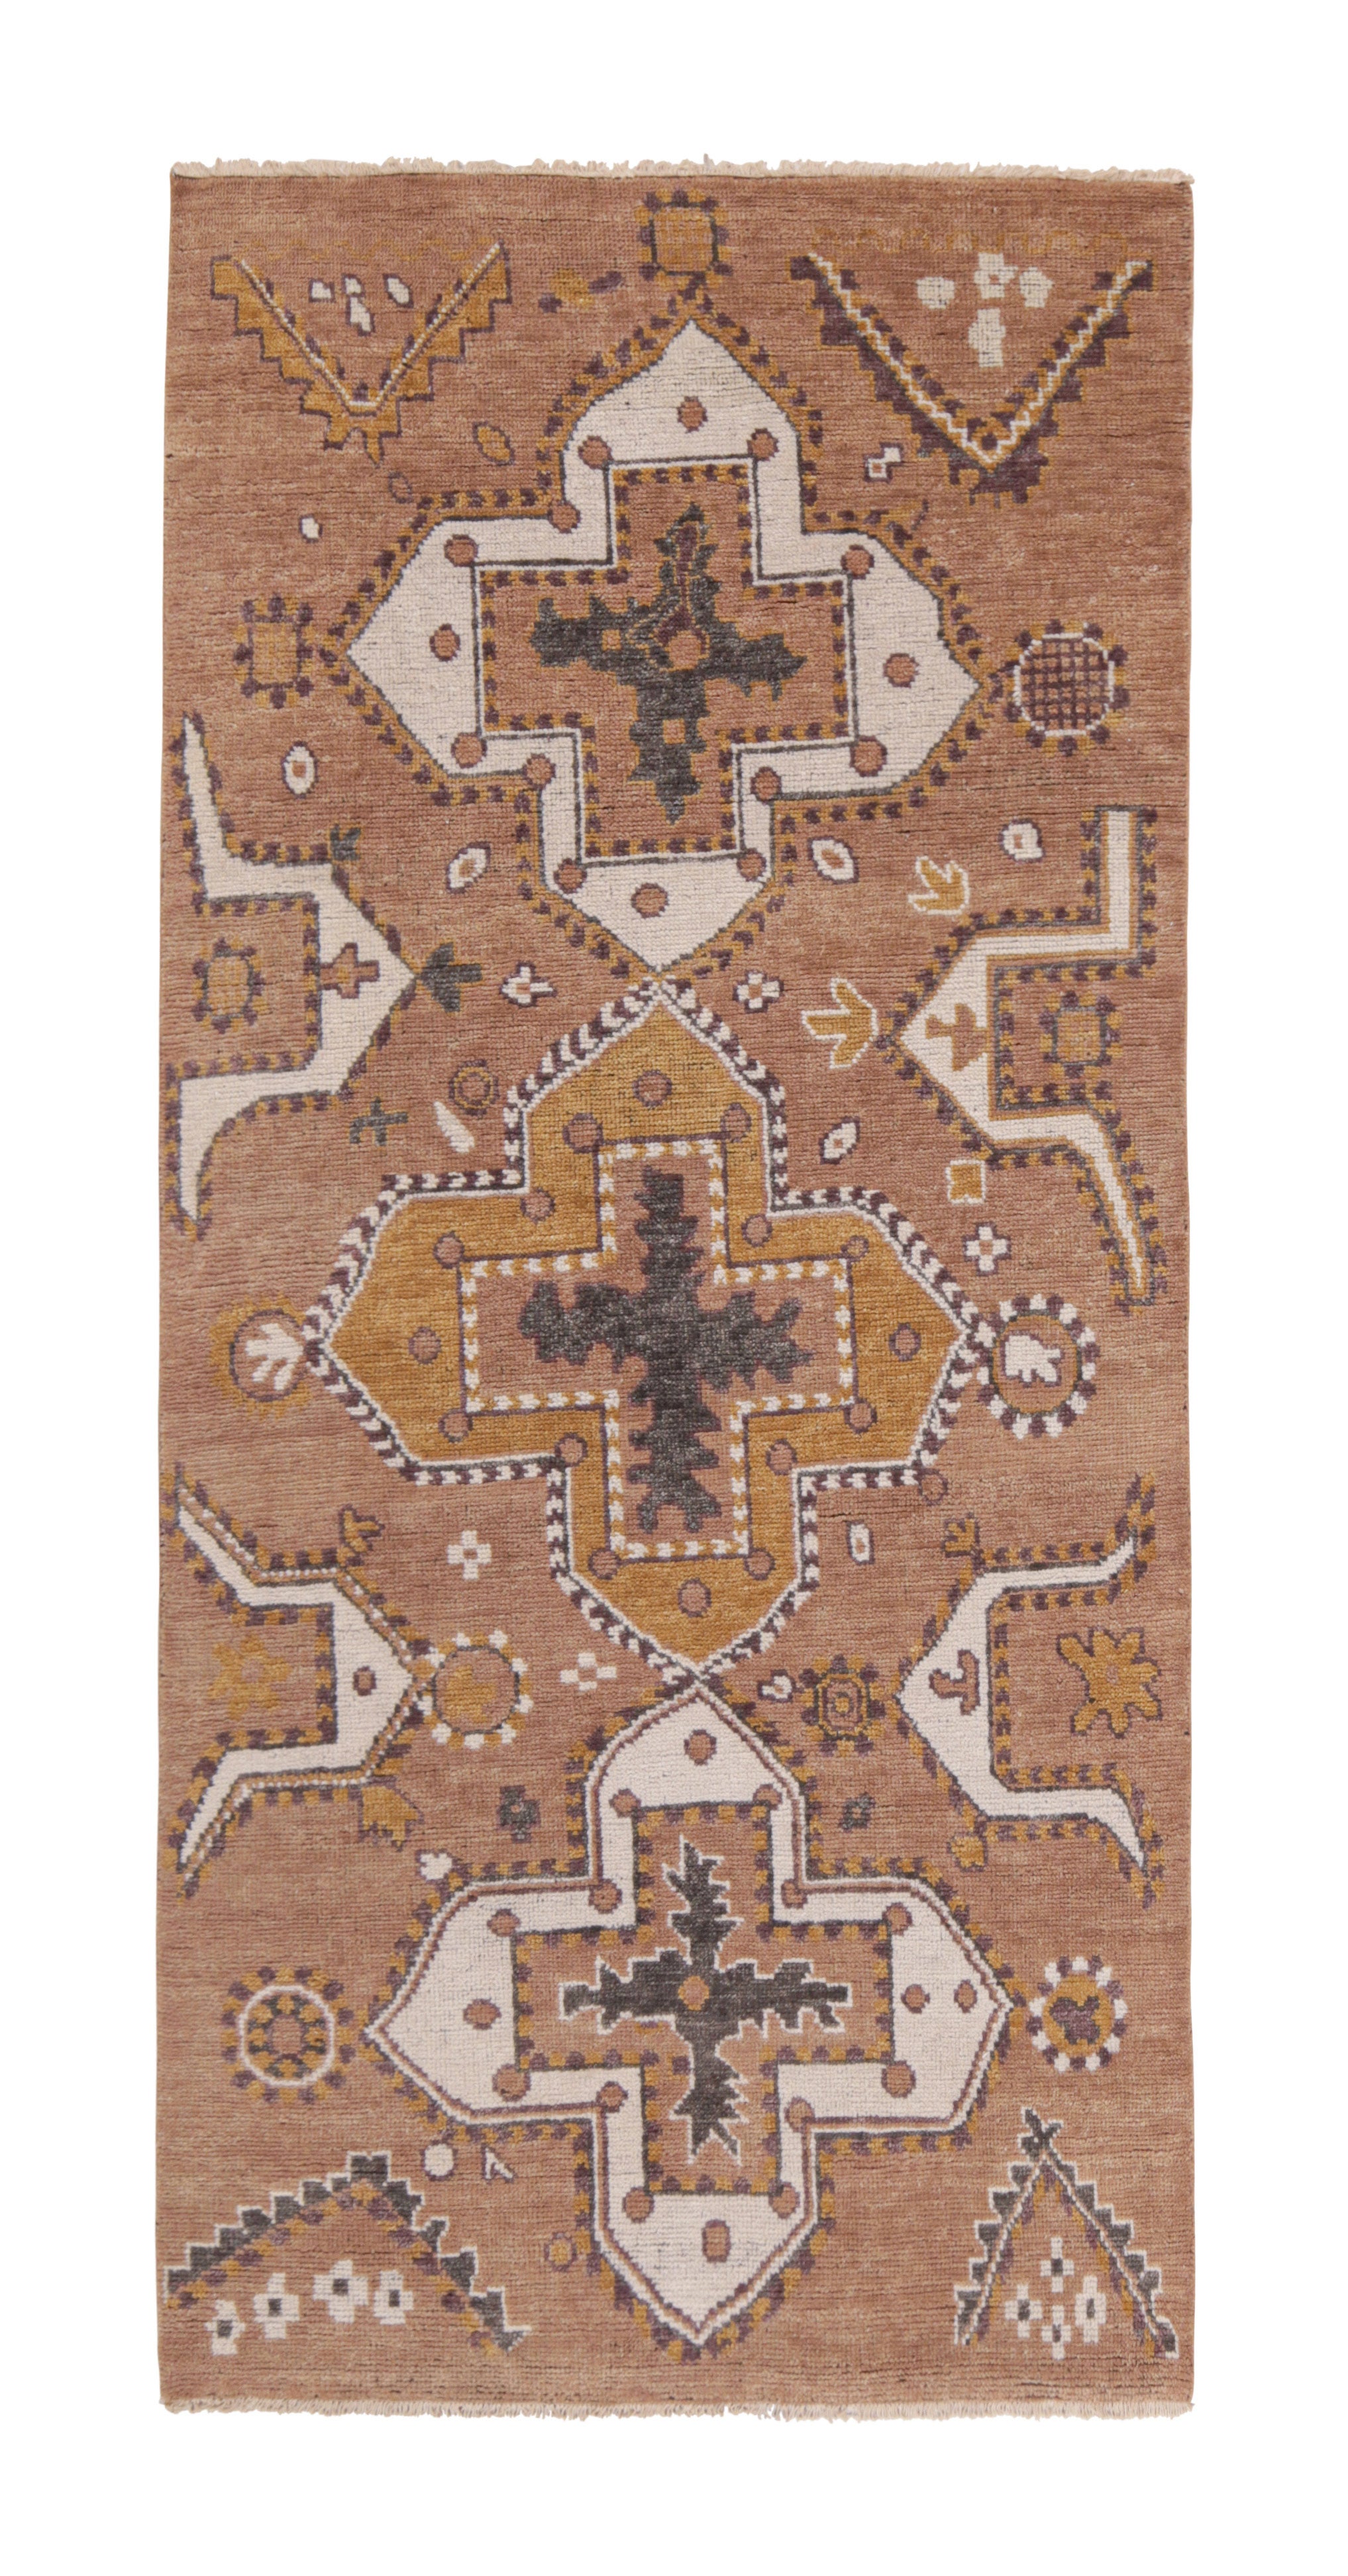 Rug & Kilim’s Tribal Style Rug in Rust with Gold and White Medallion Patterns For Sale